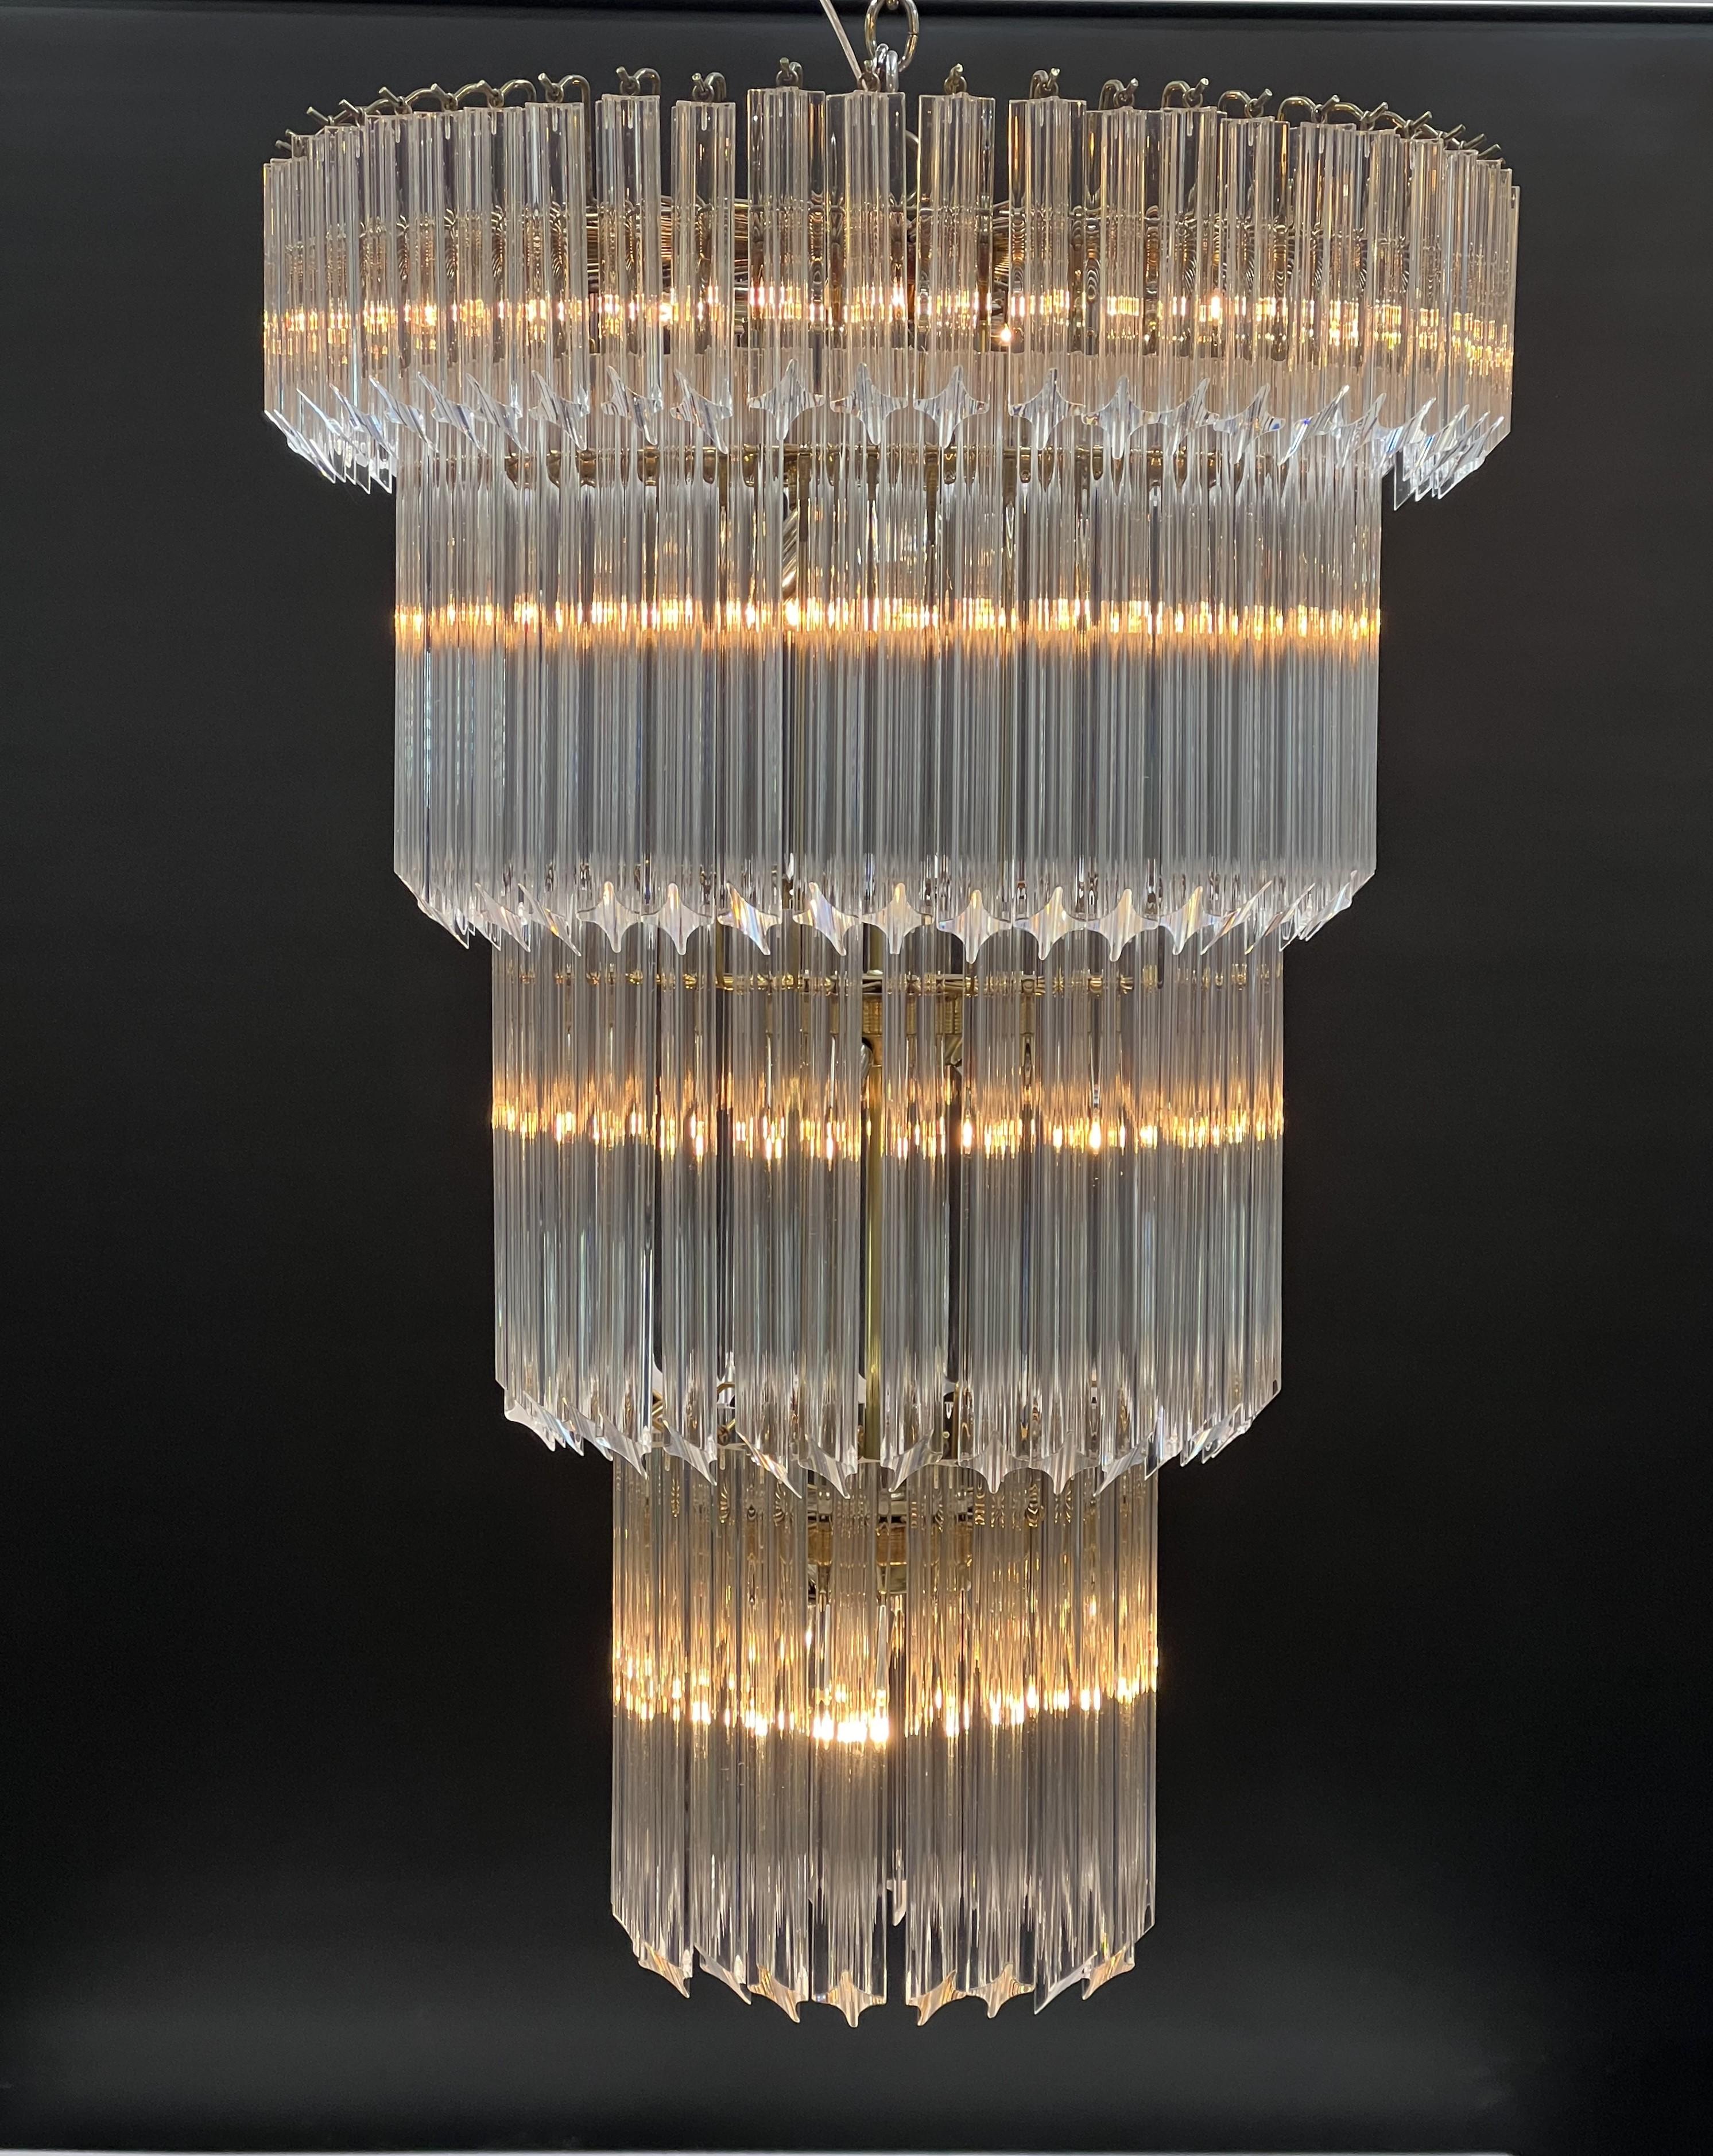 This 1960's American Lucite cascading chandelier is from the University of Northern Colorado's Grand Ballroom. The University of Northern Colorado located in Greeley Colorado built the grand ball room in the early 1960s. This chandelier has been